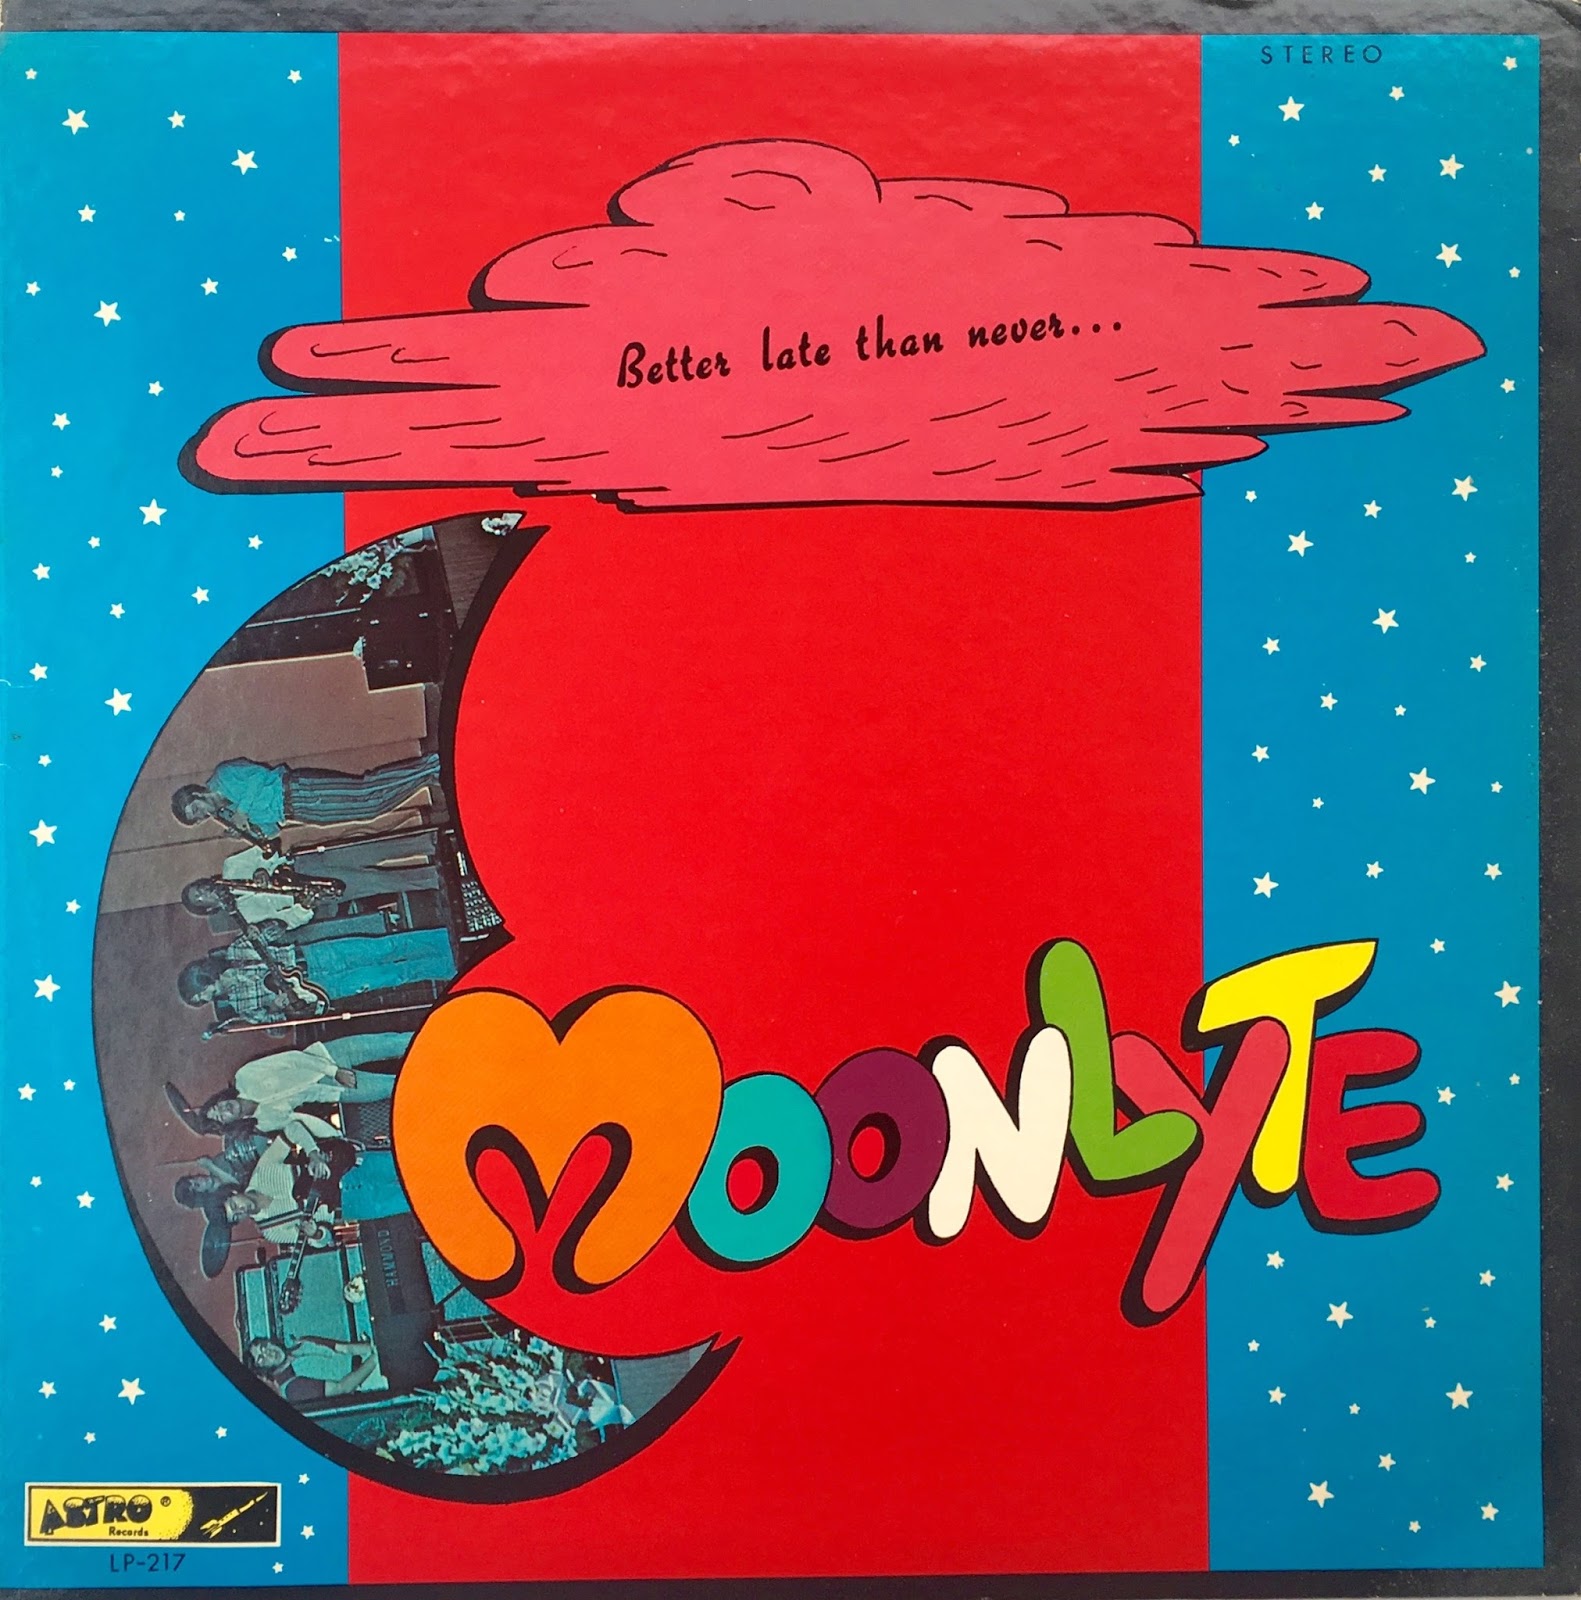 Tyme-Machine: Moonlyte - Better Late Than Never (us 1974)